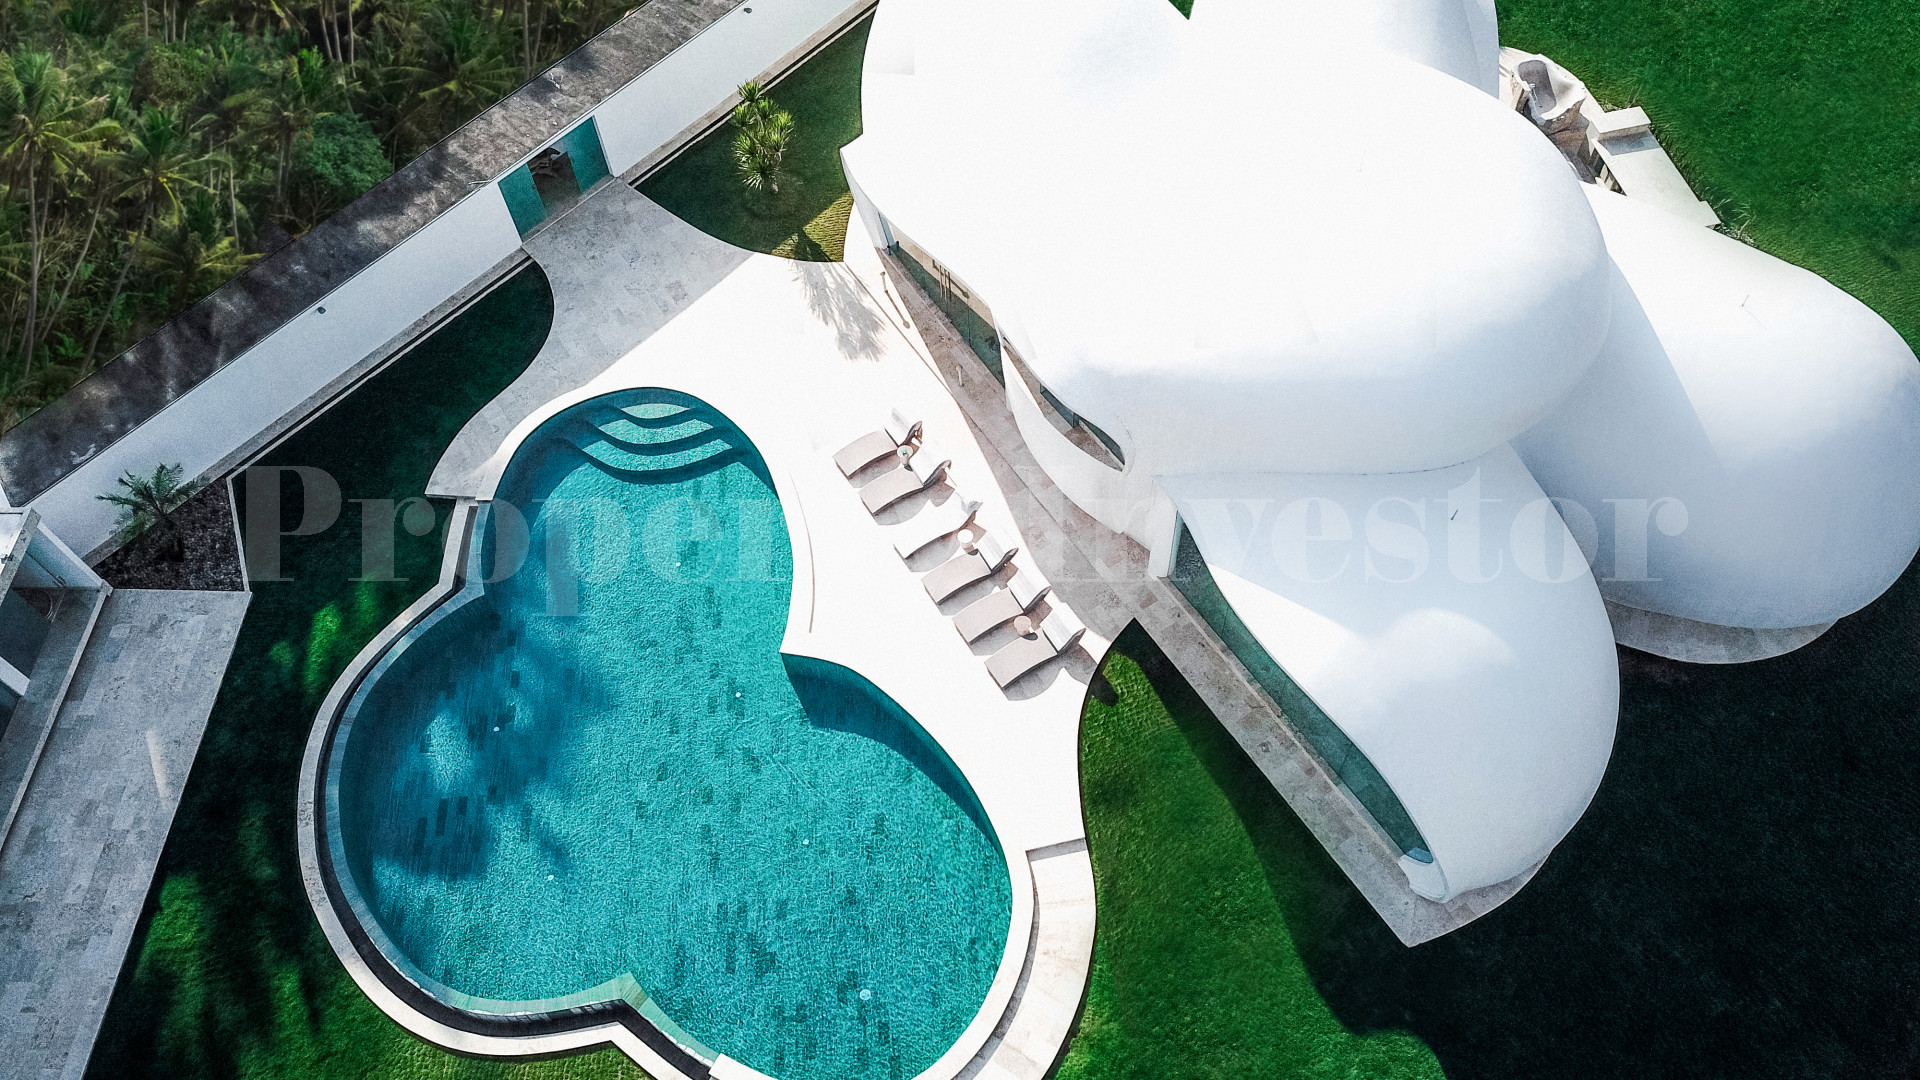 High-End Boutique Hotel or 3 Private Residences in Tabanan, Bali